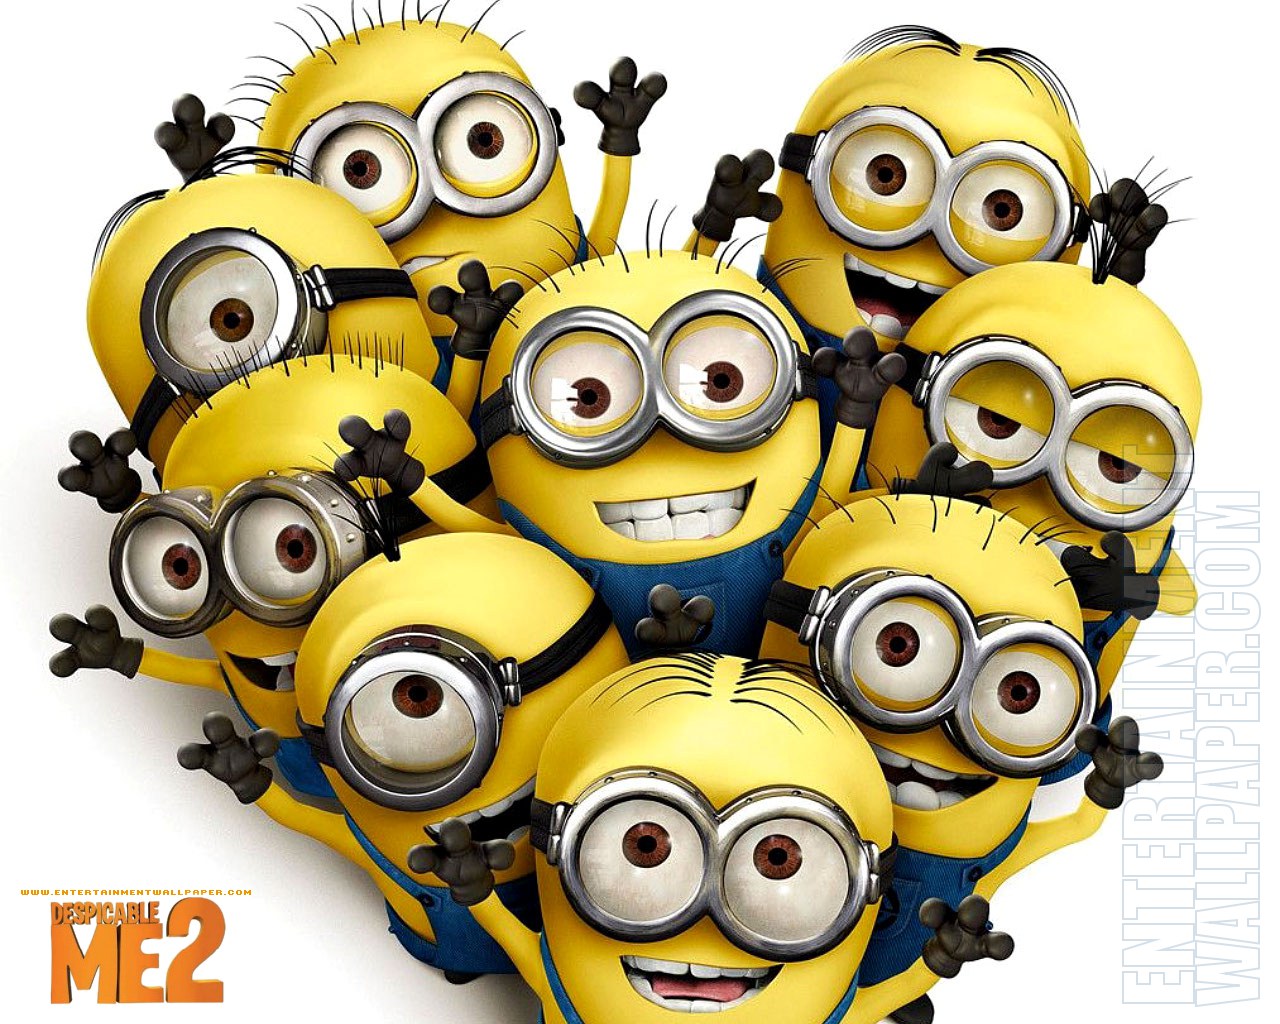 Despicable Me 2 Blu Ray/DVD Date and Details! MINIONS!!! MORE MINION